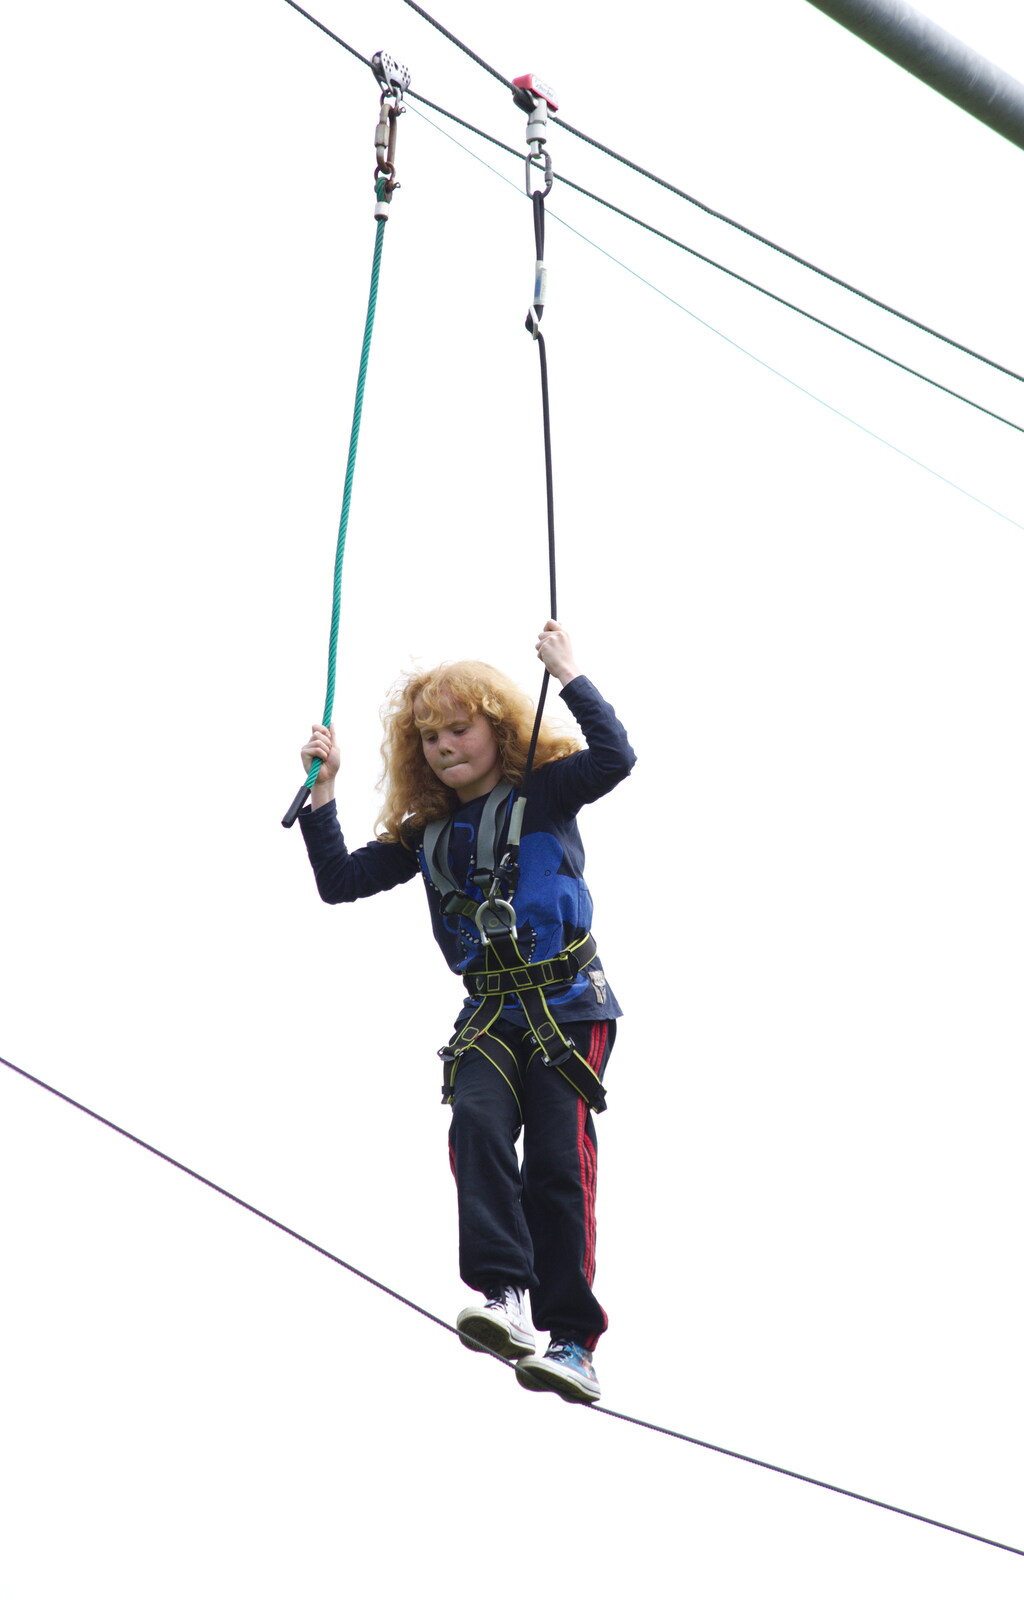 A Birthday Trip to the Zoo, Banham, Norfolk - 26th May 2014: A girl on the high-wire